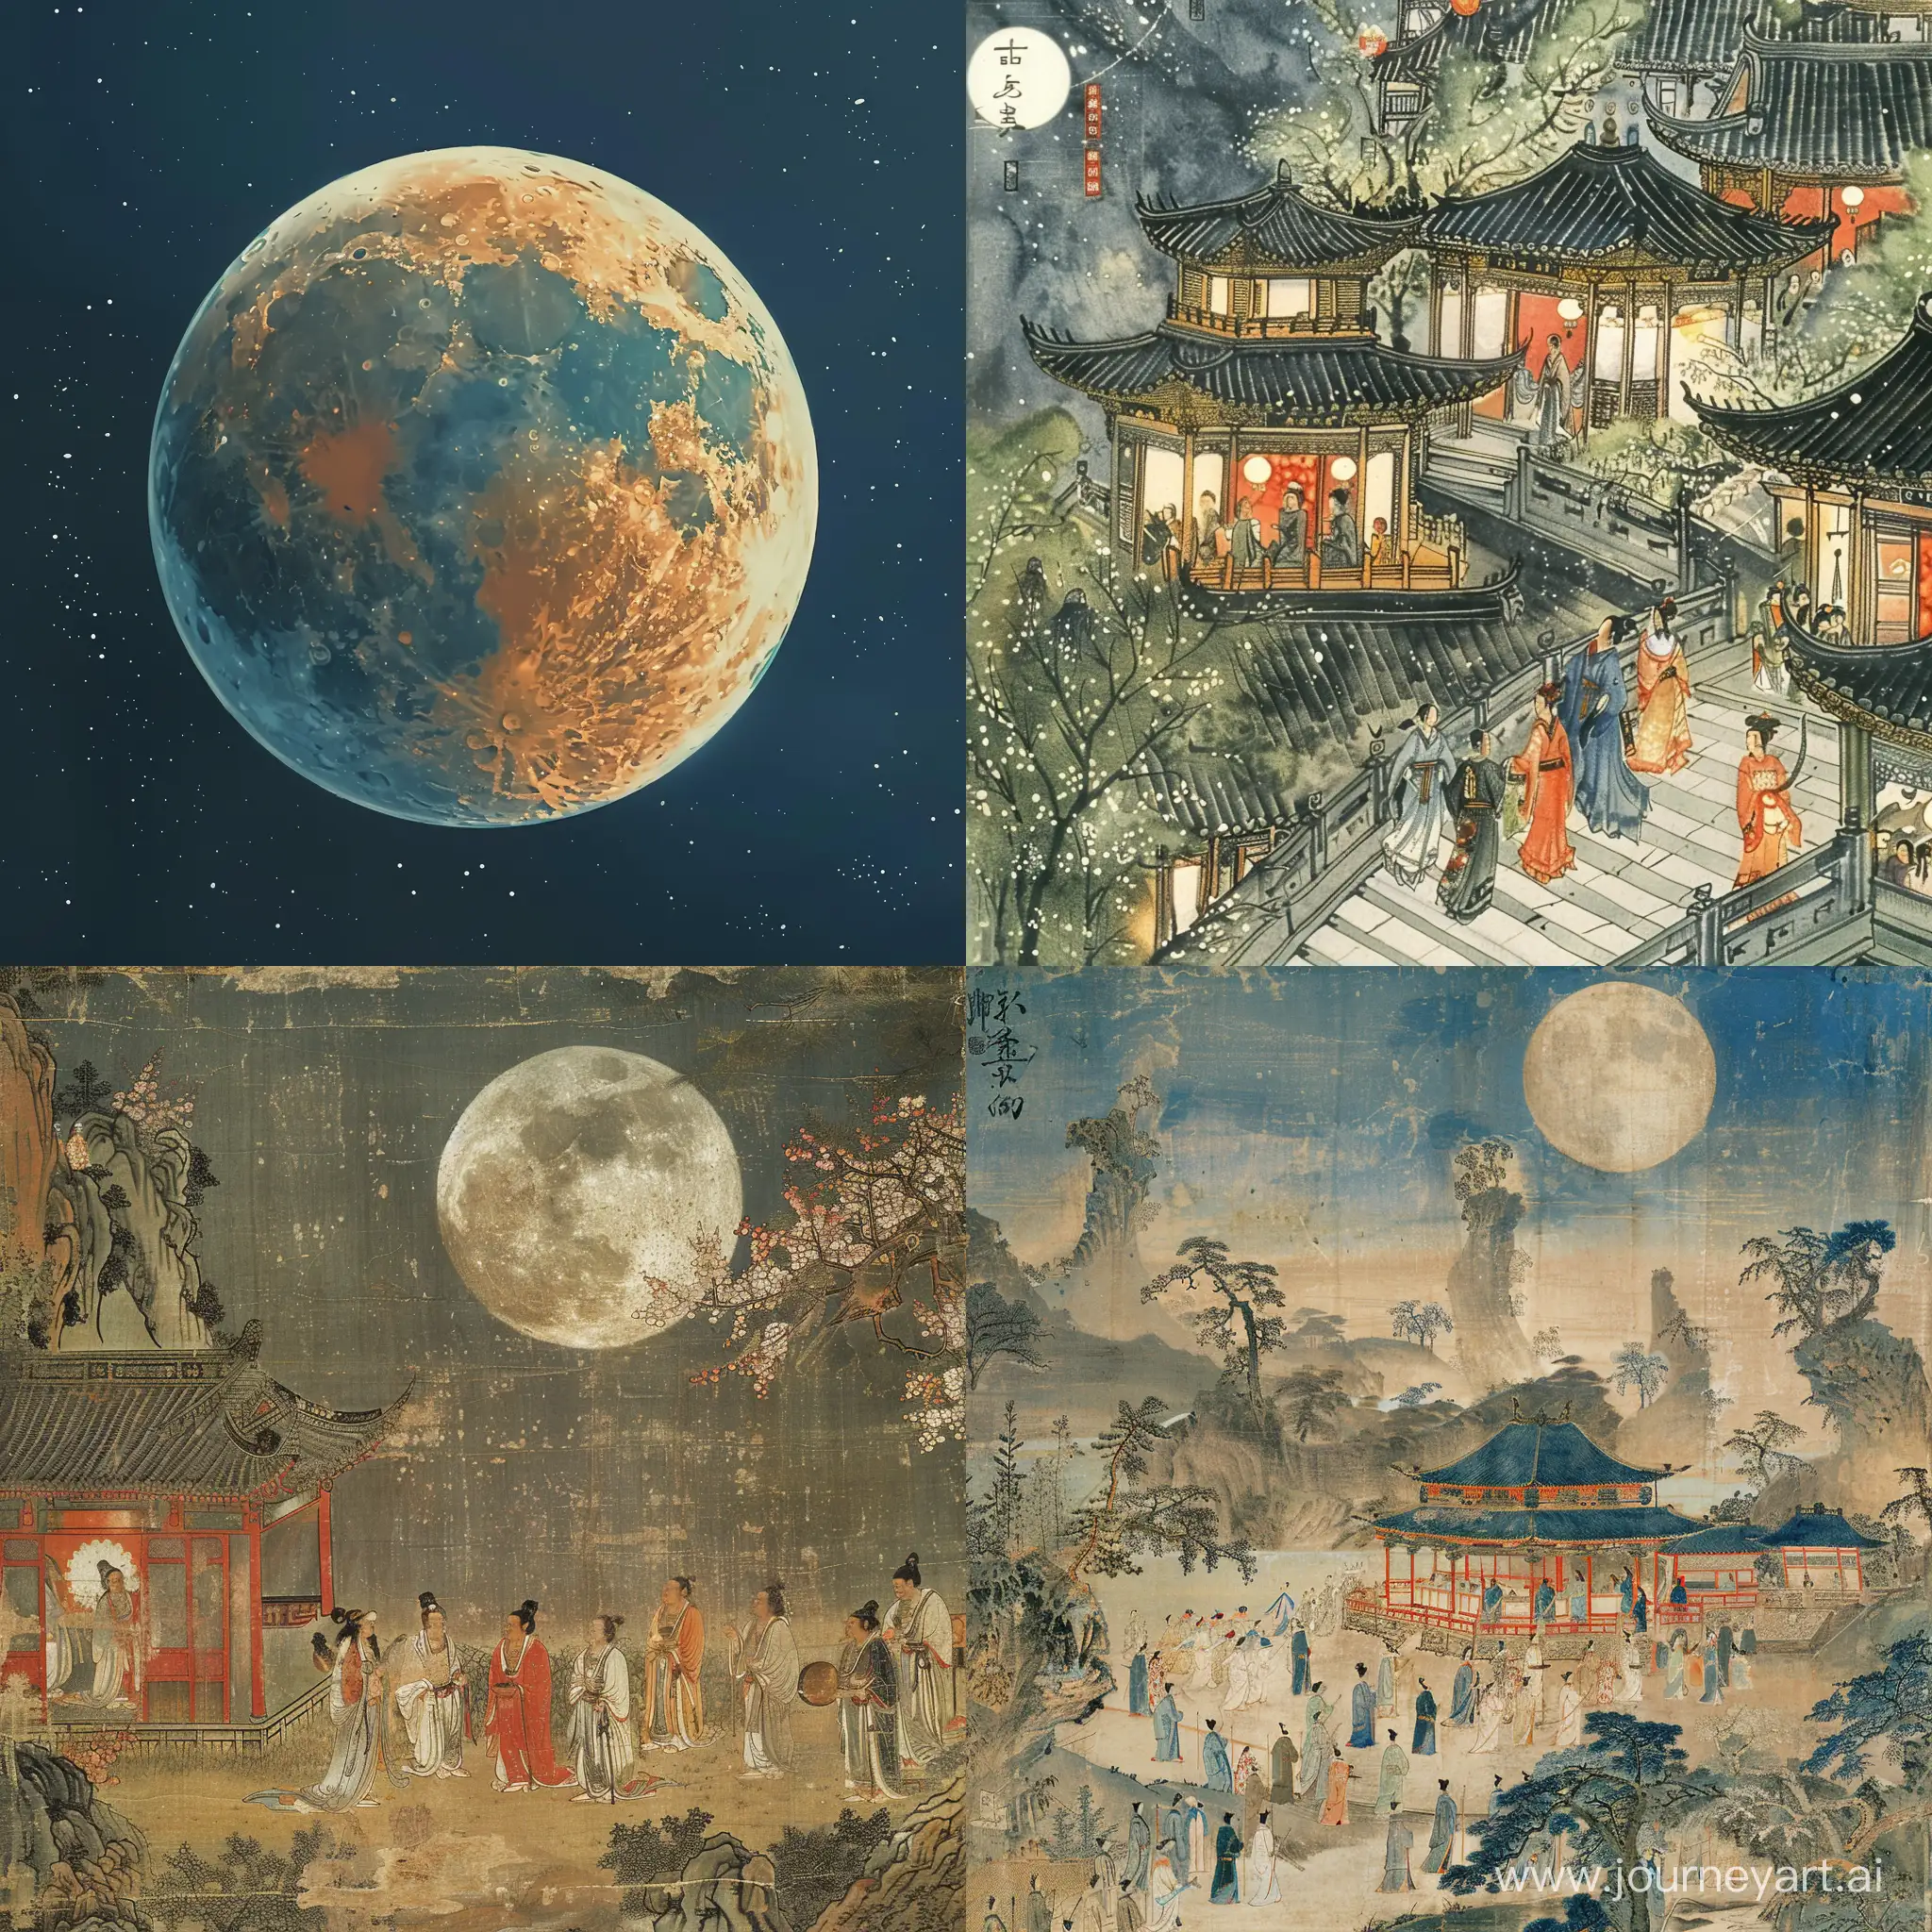 Traditional-Celebration-on-the-Seventh-Lunar-Day